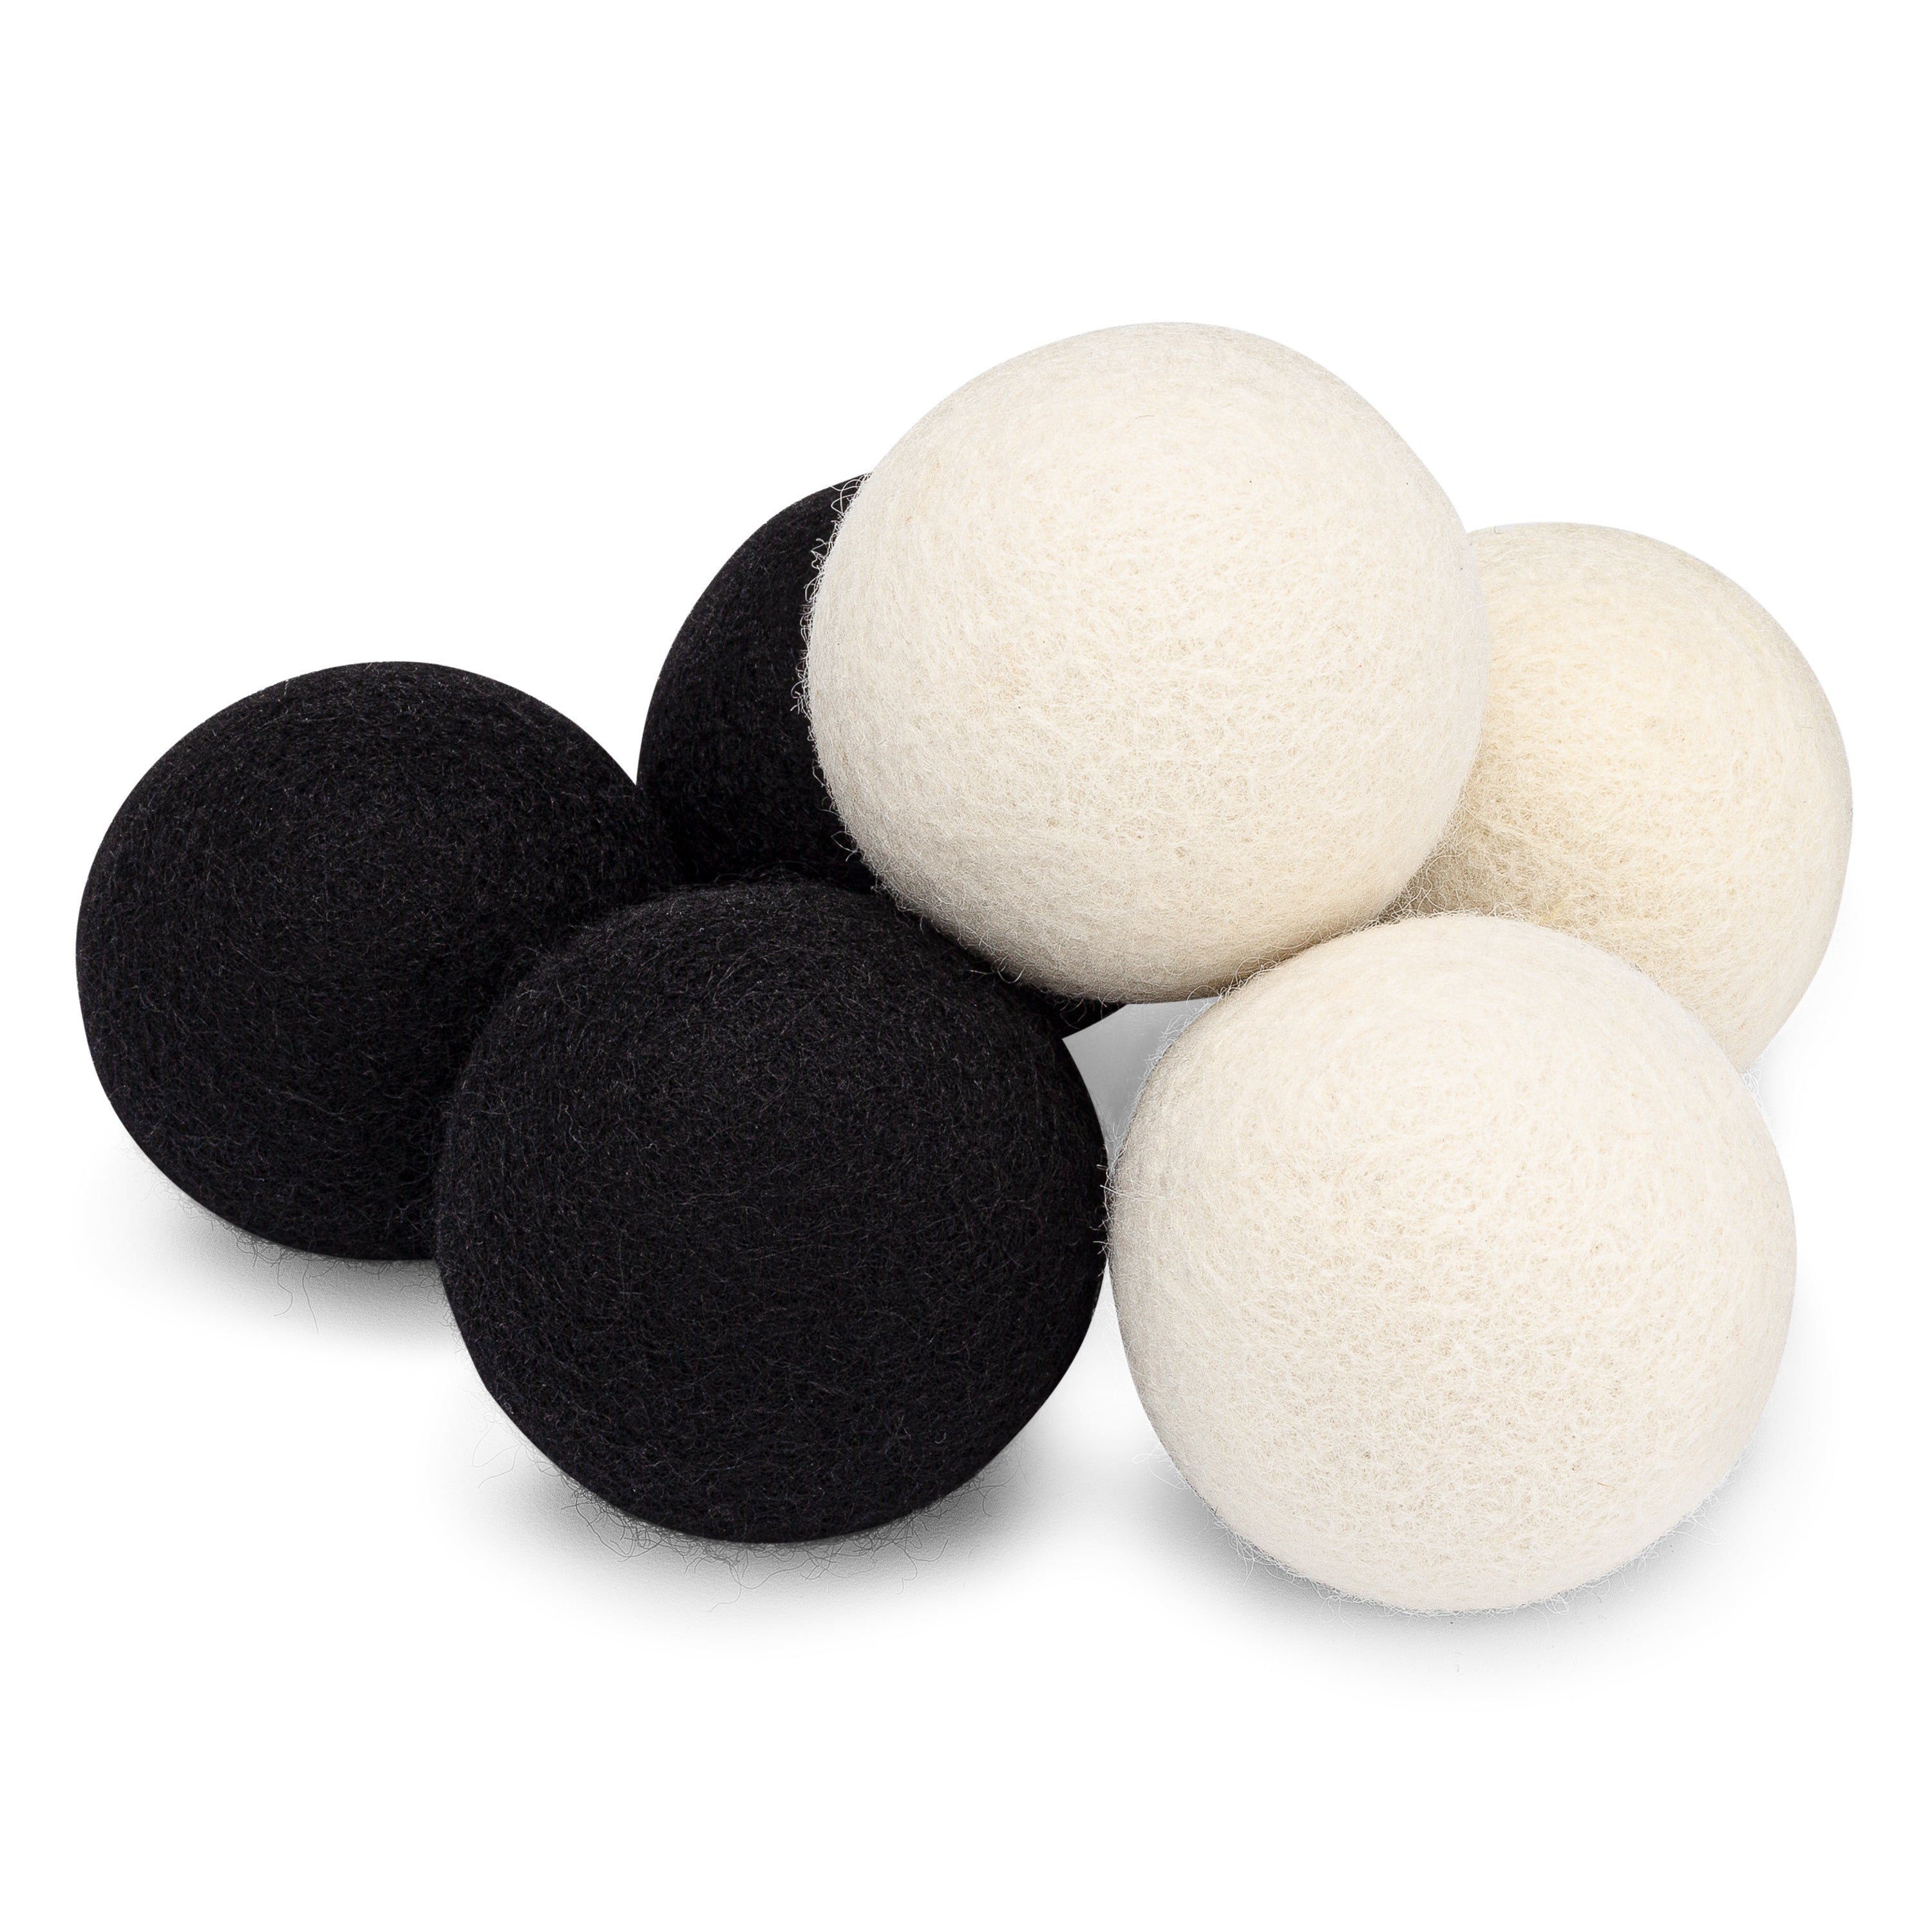 Wool Dryer Balls – That Red House